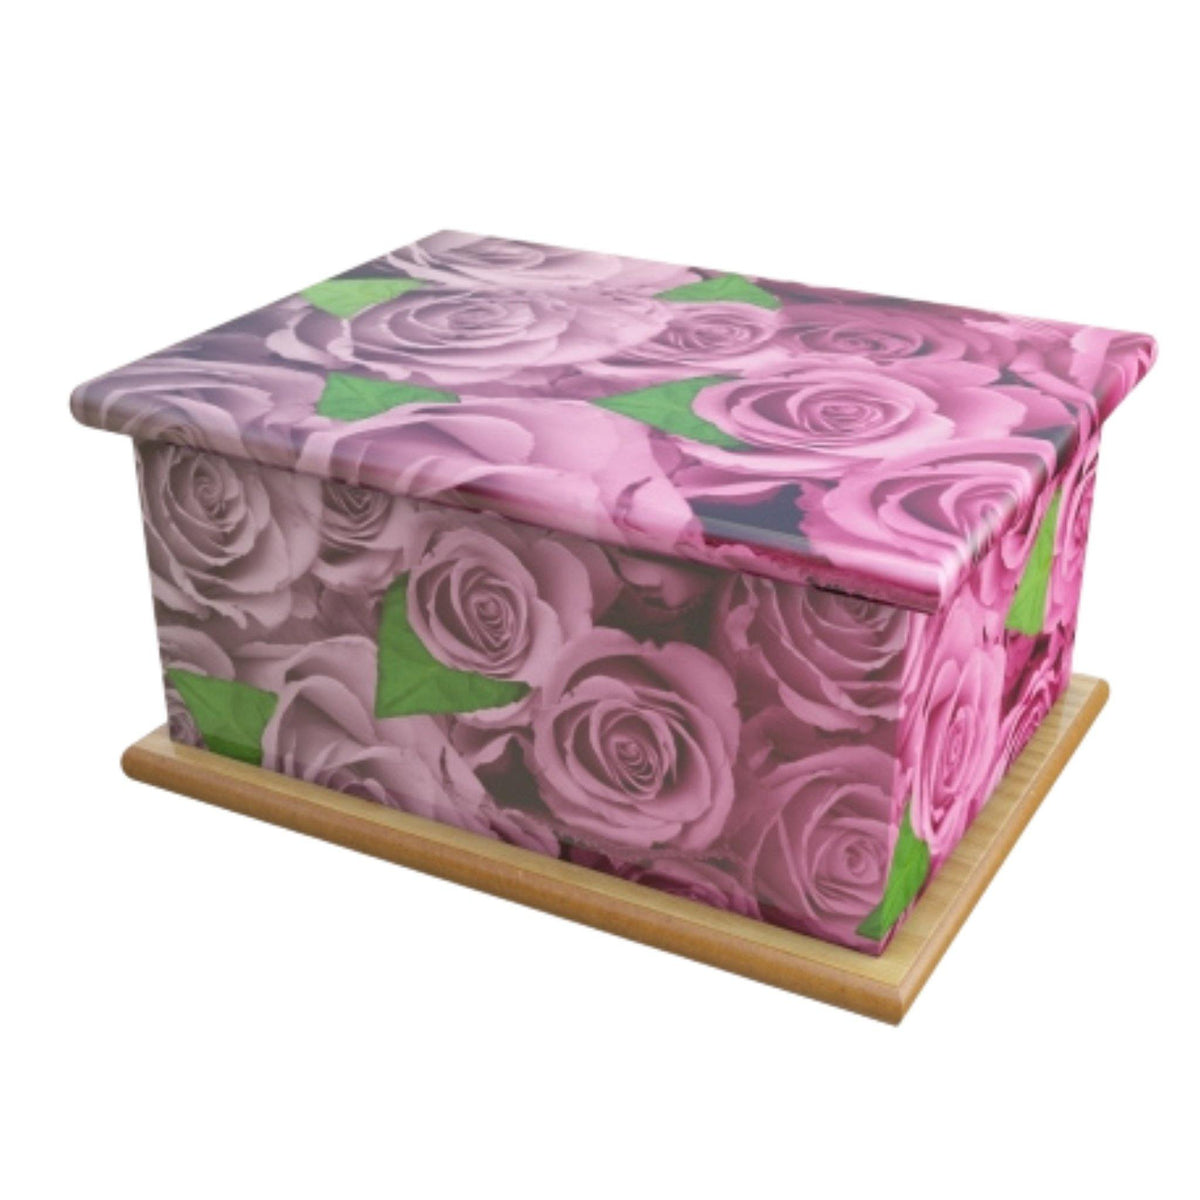 Wooden Urn Bed of Roses Adult COL